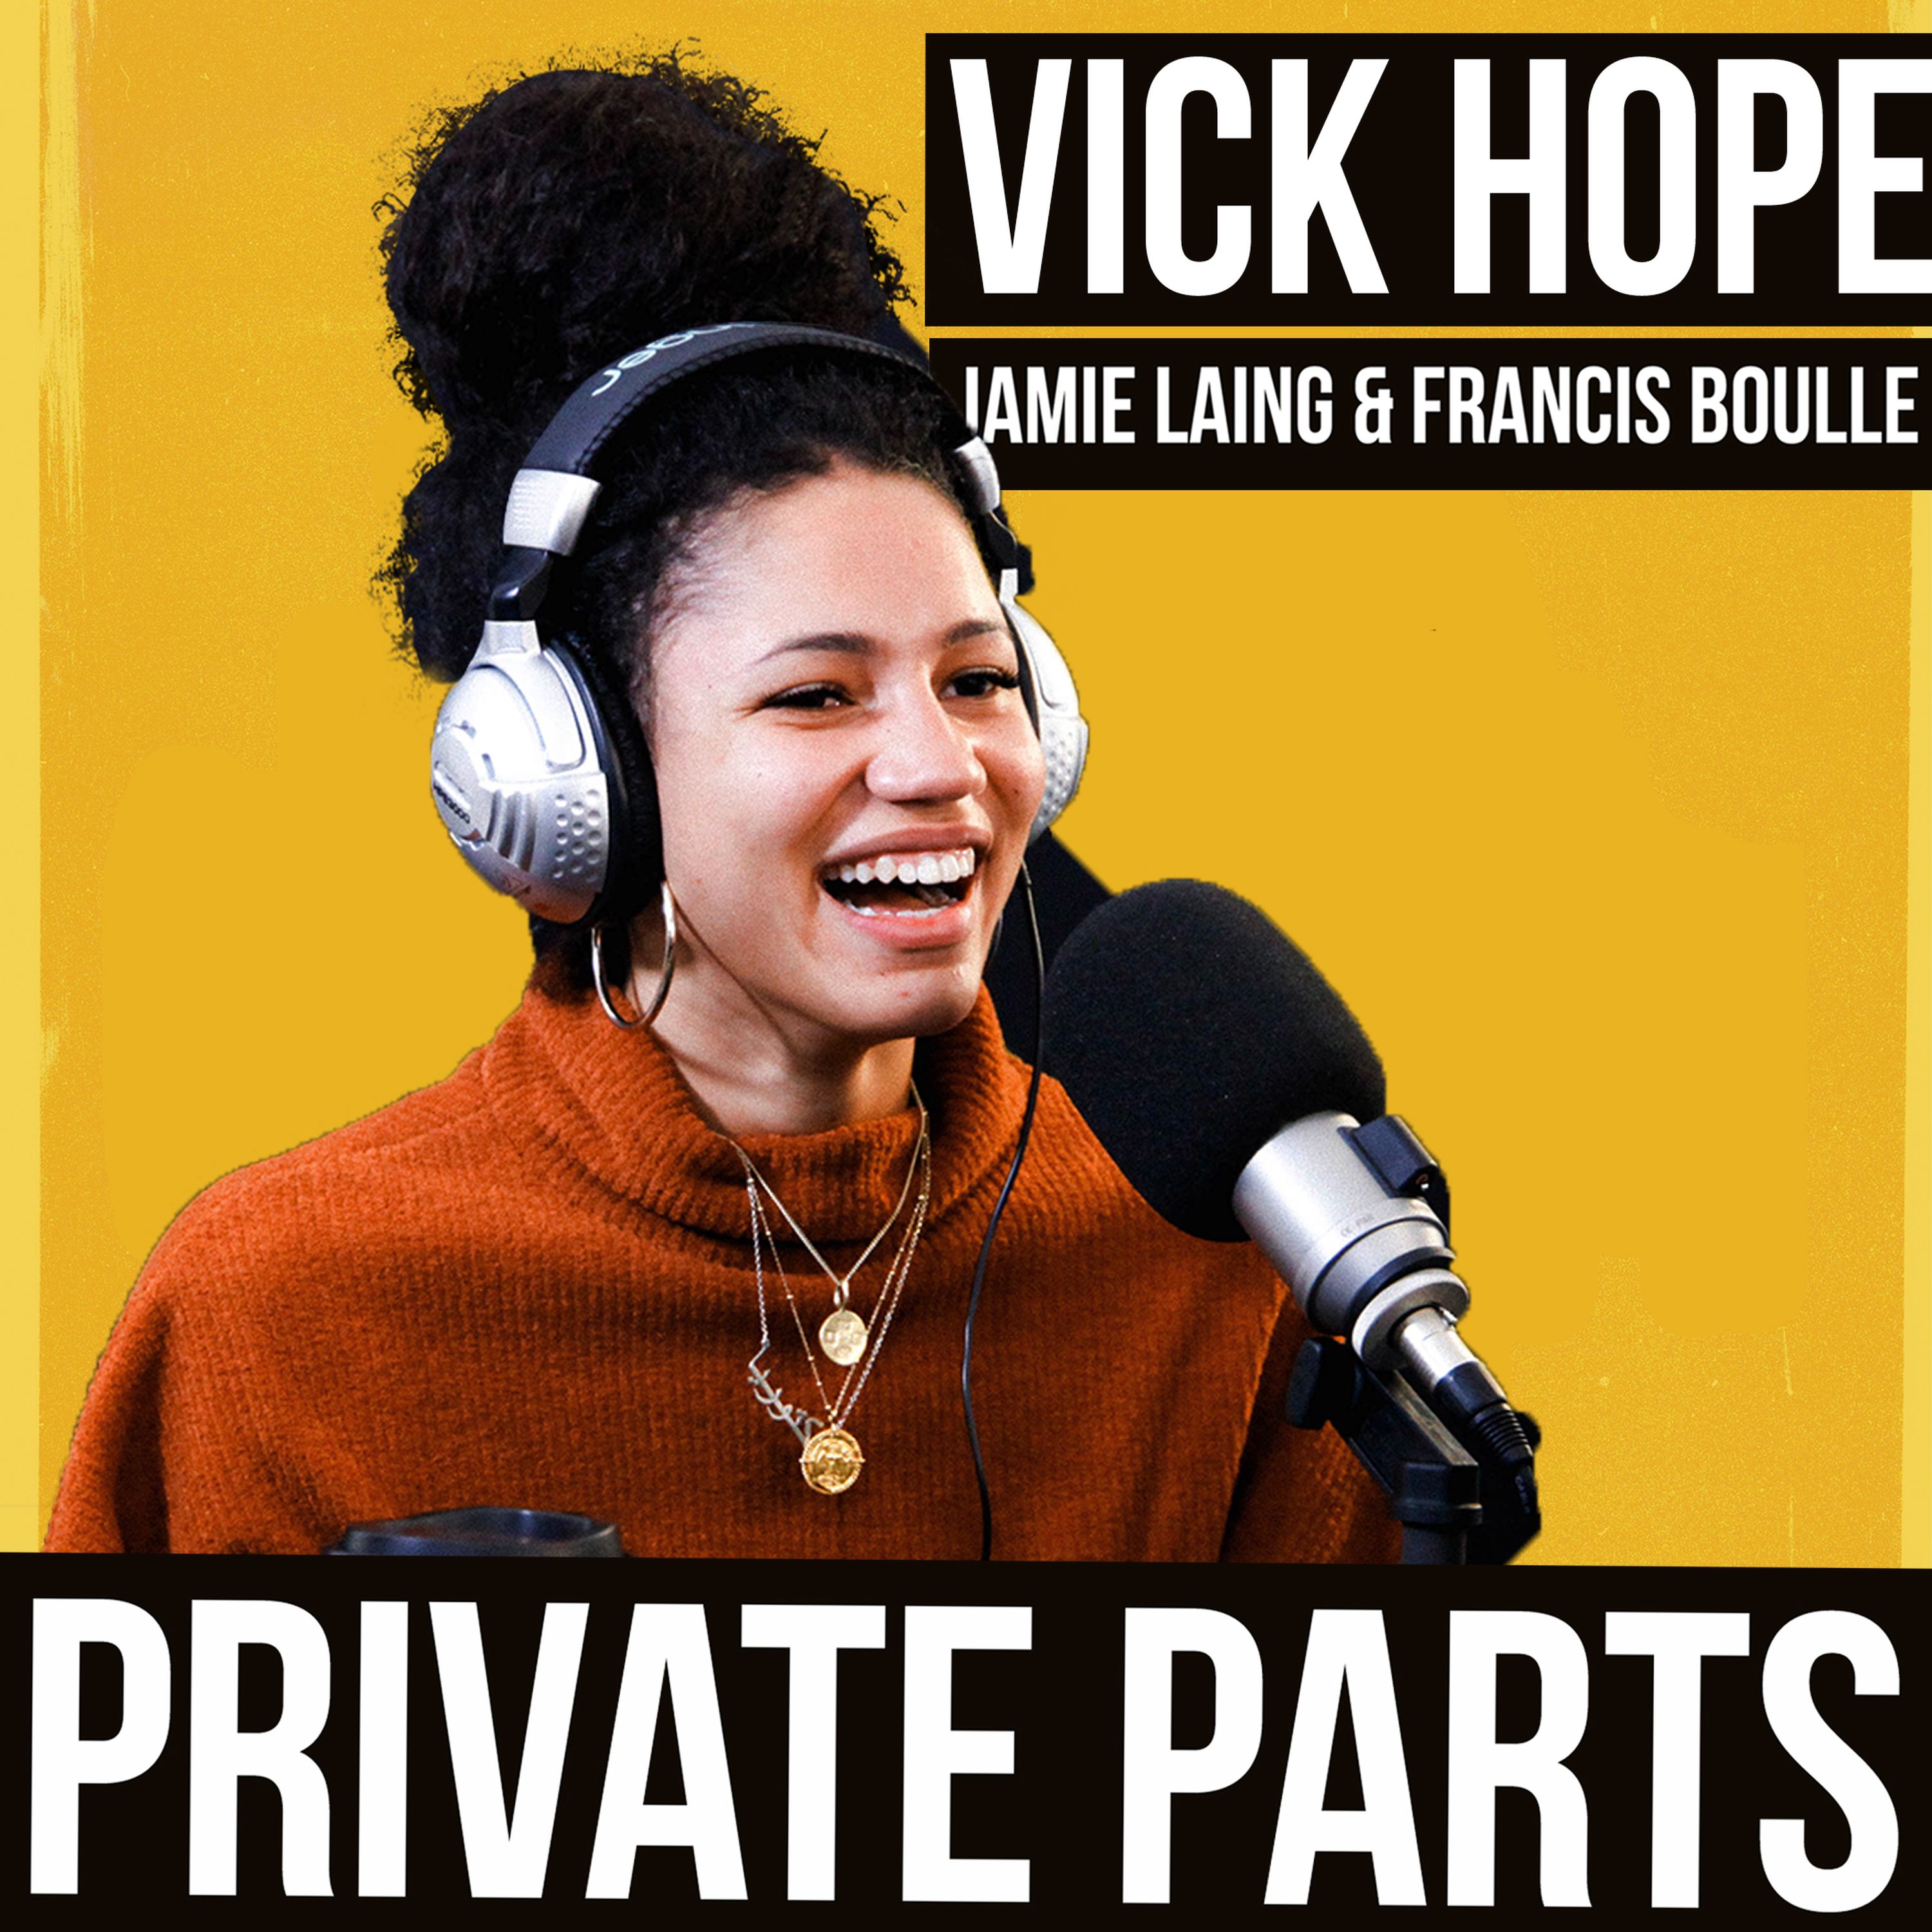 Wwwsexvd - 103: What's your porn name? - Vick Hope - Part 1 â€“ Private ...